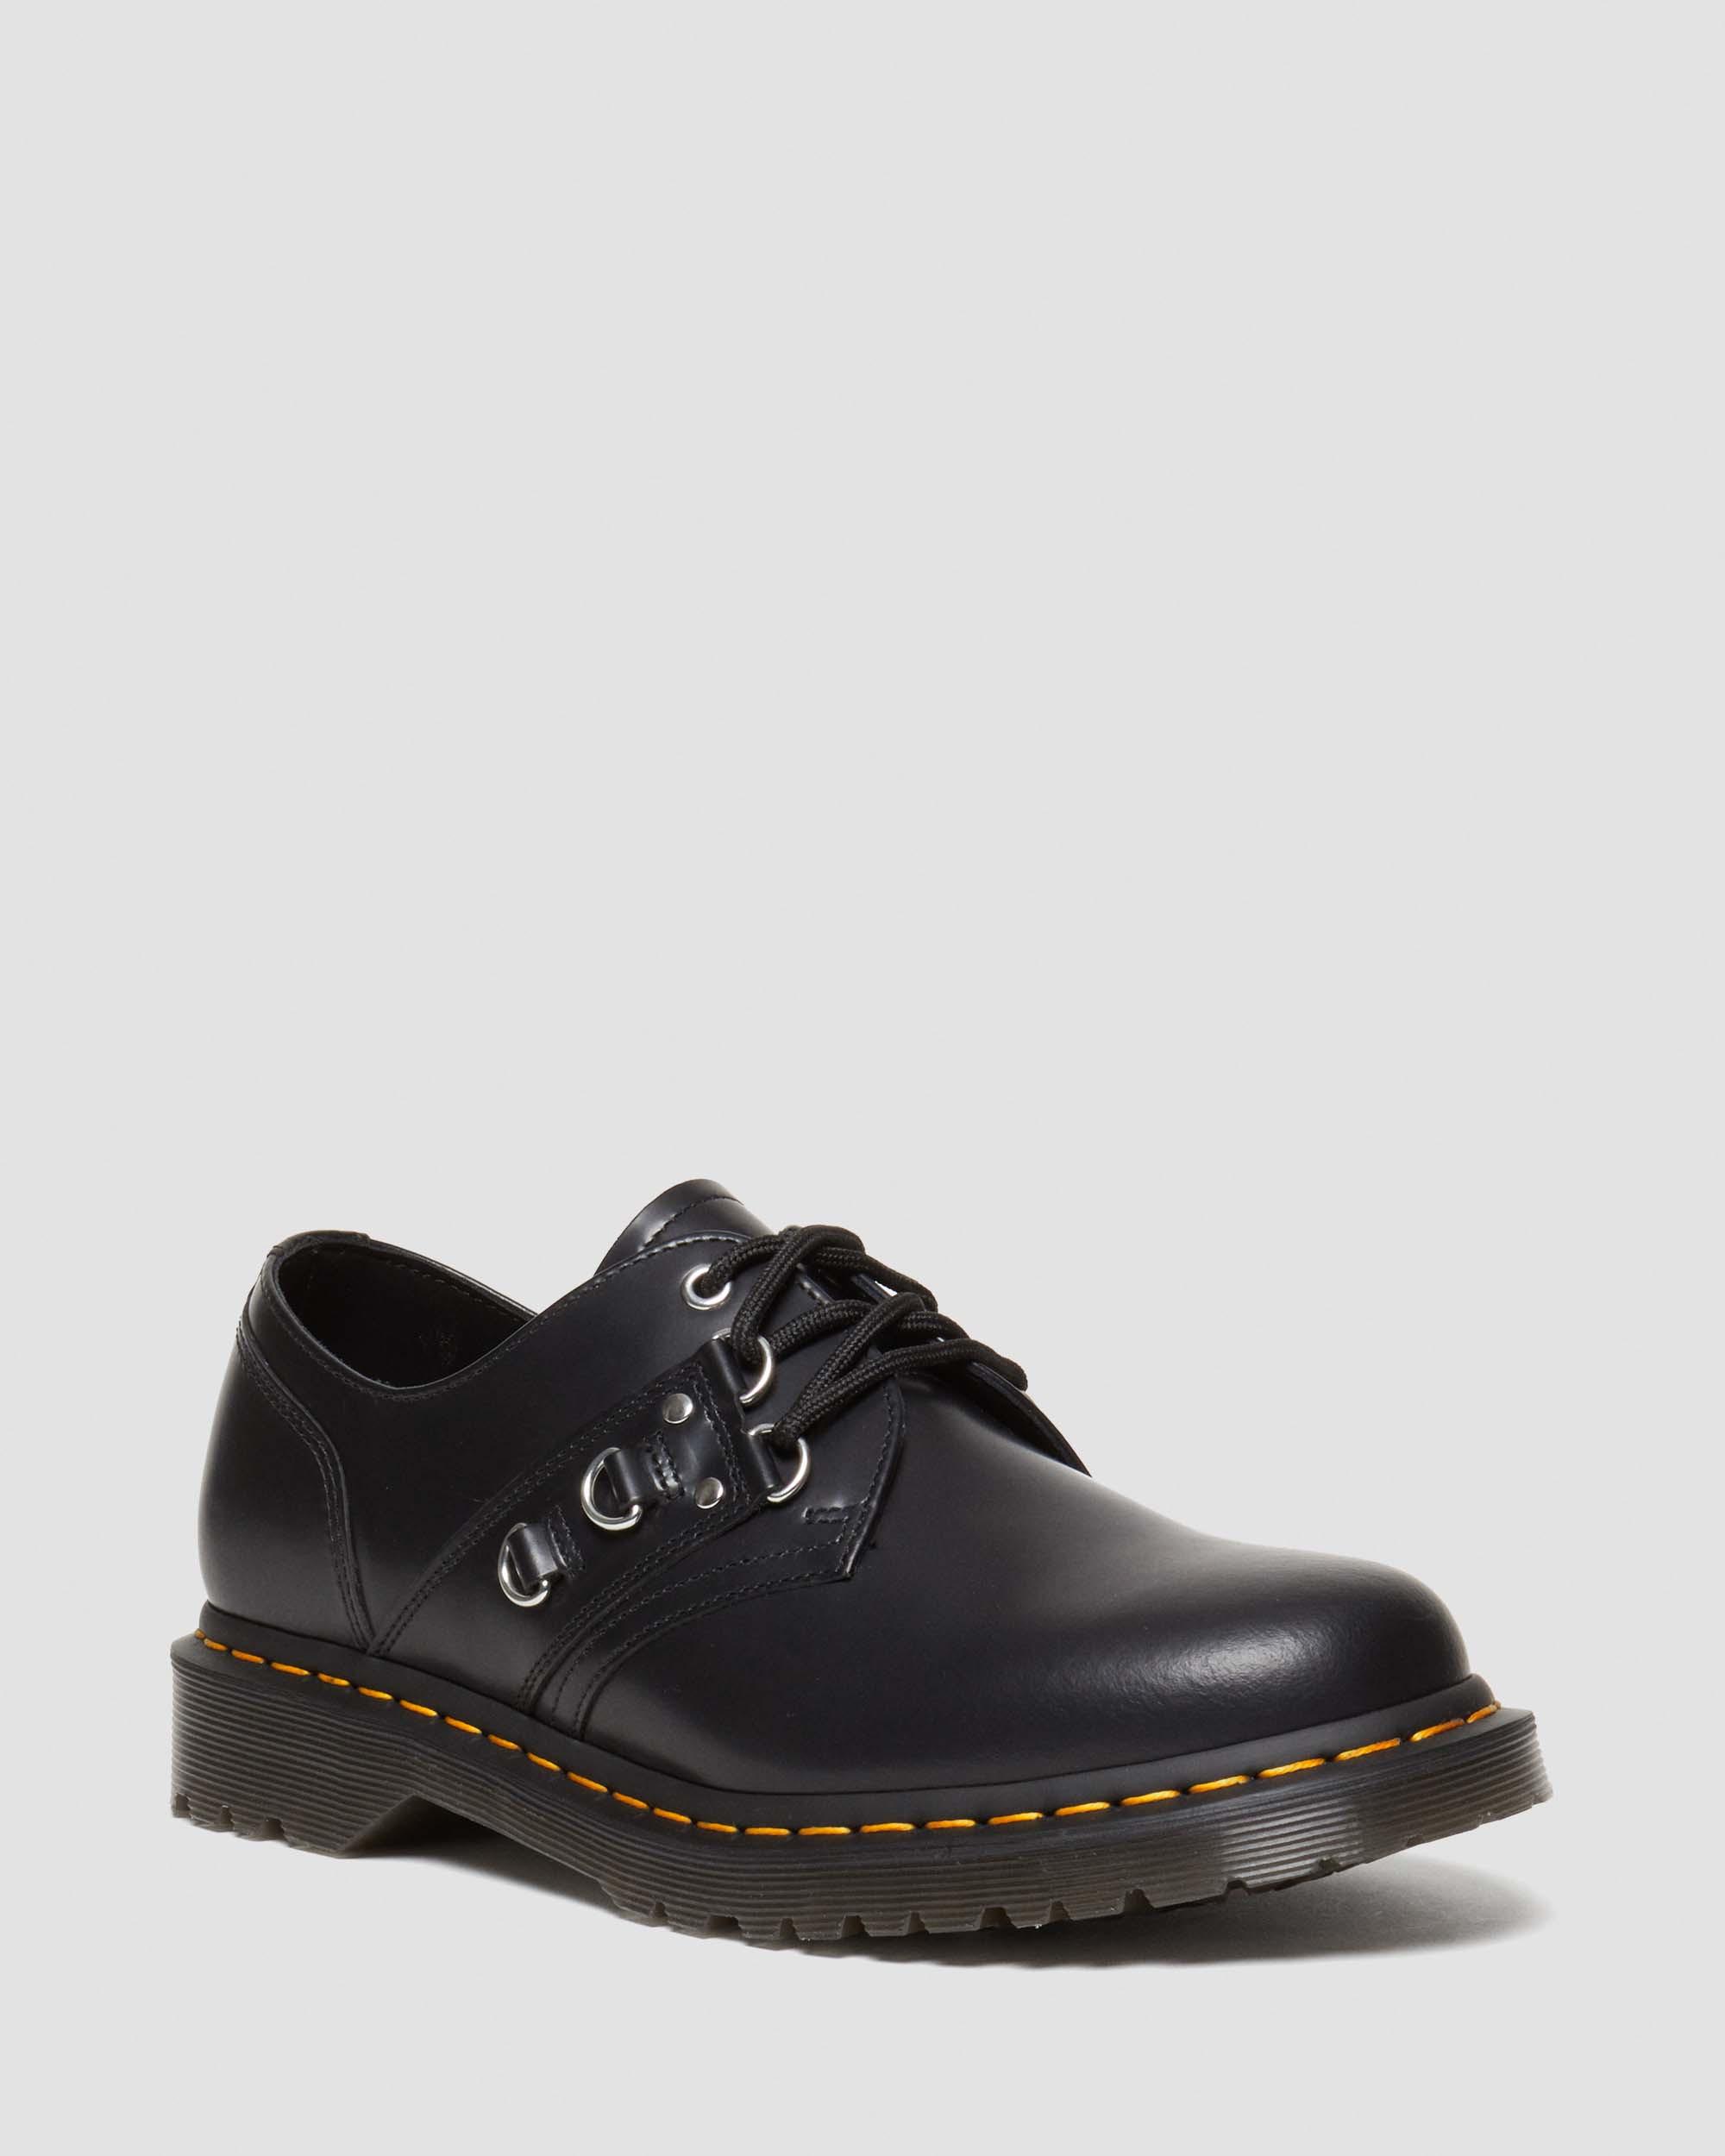 Dr. Martens' 1461 Hardware Polished Smooth Leather Oxford Shoes In Black